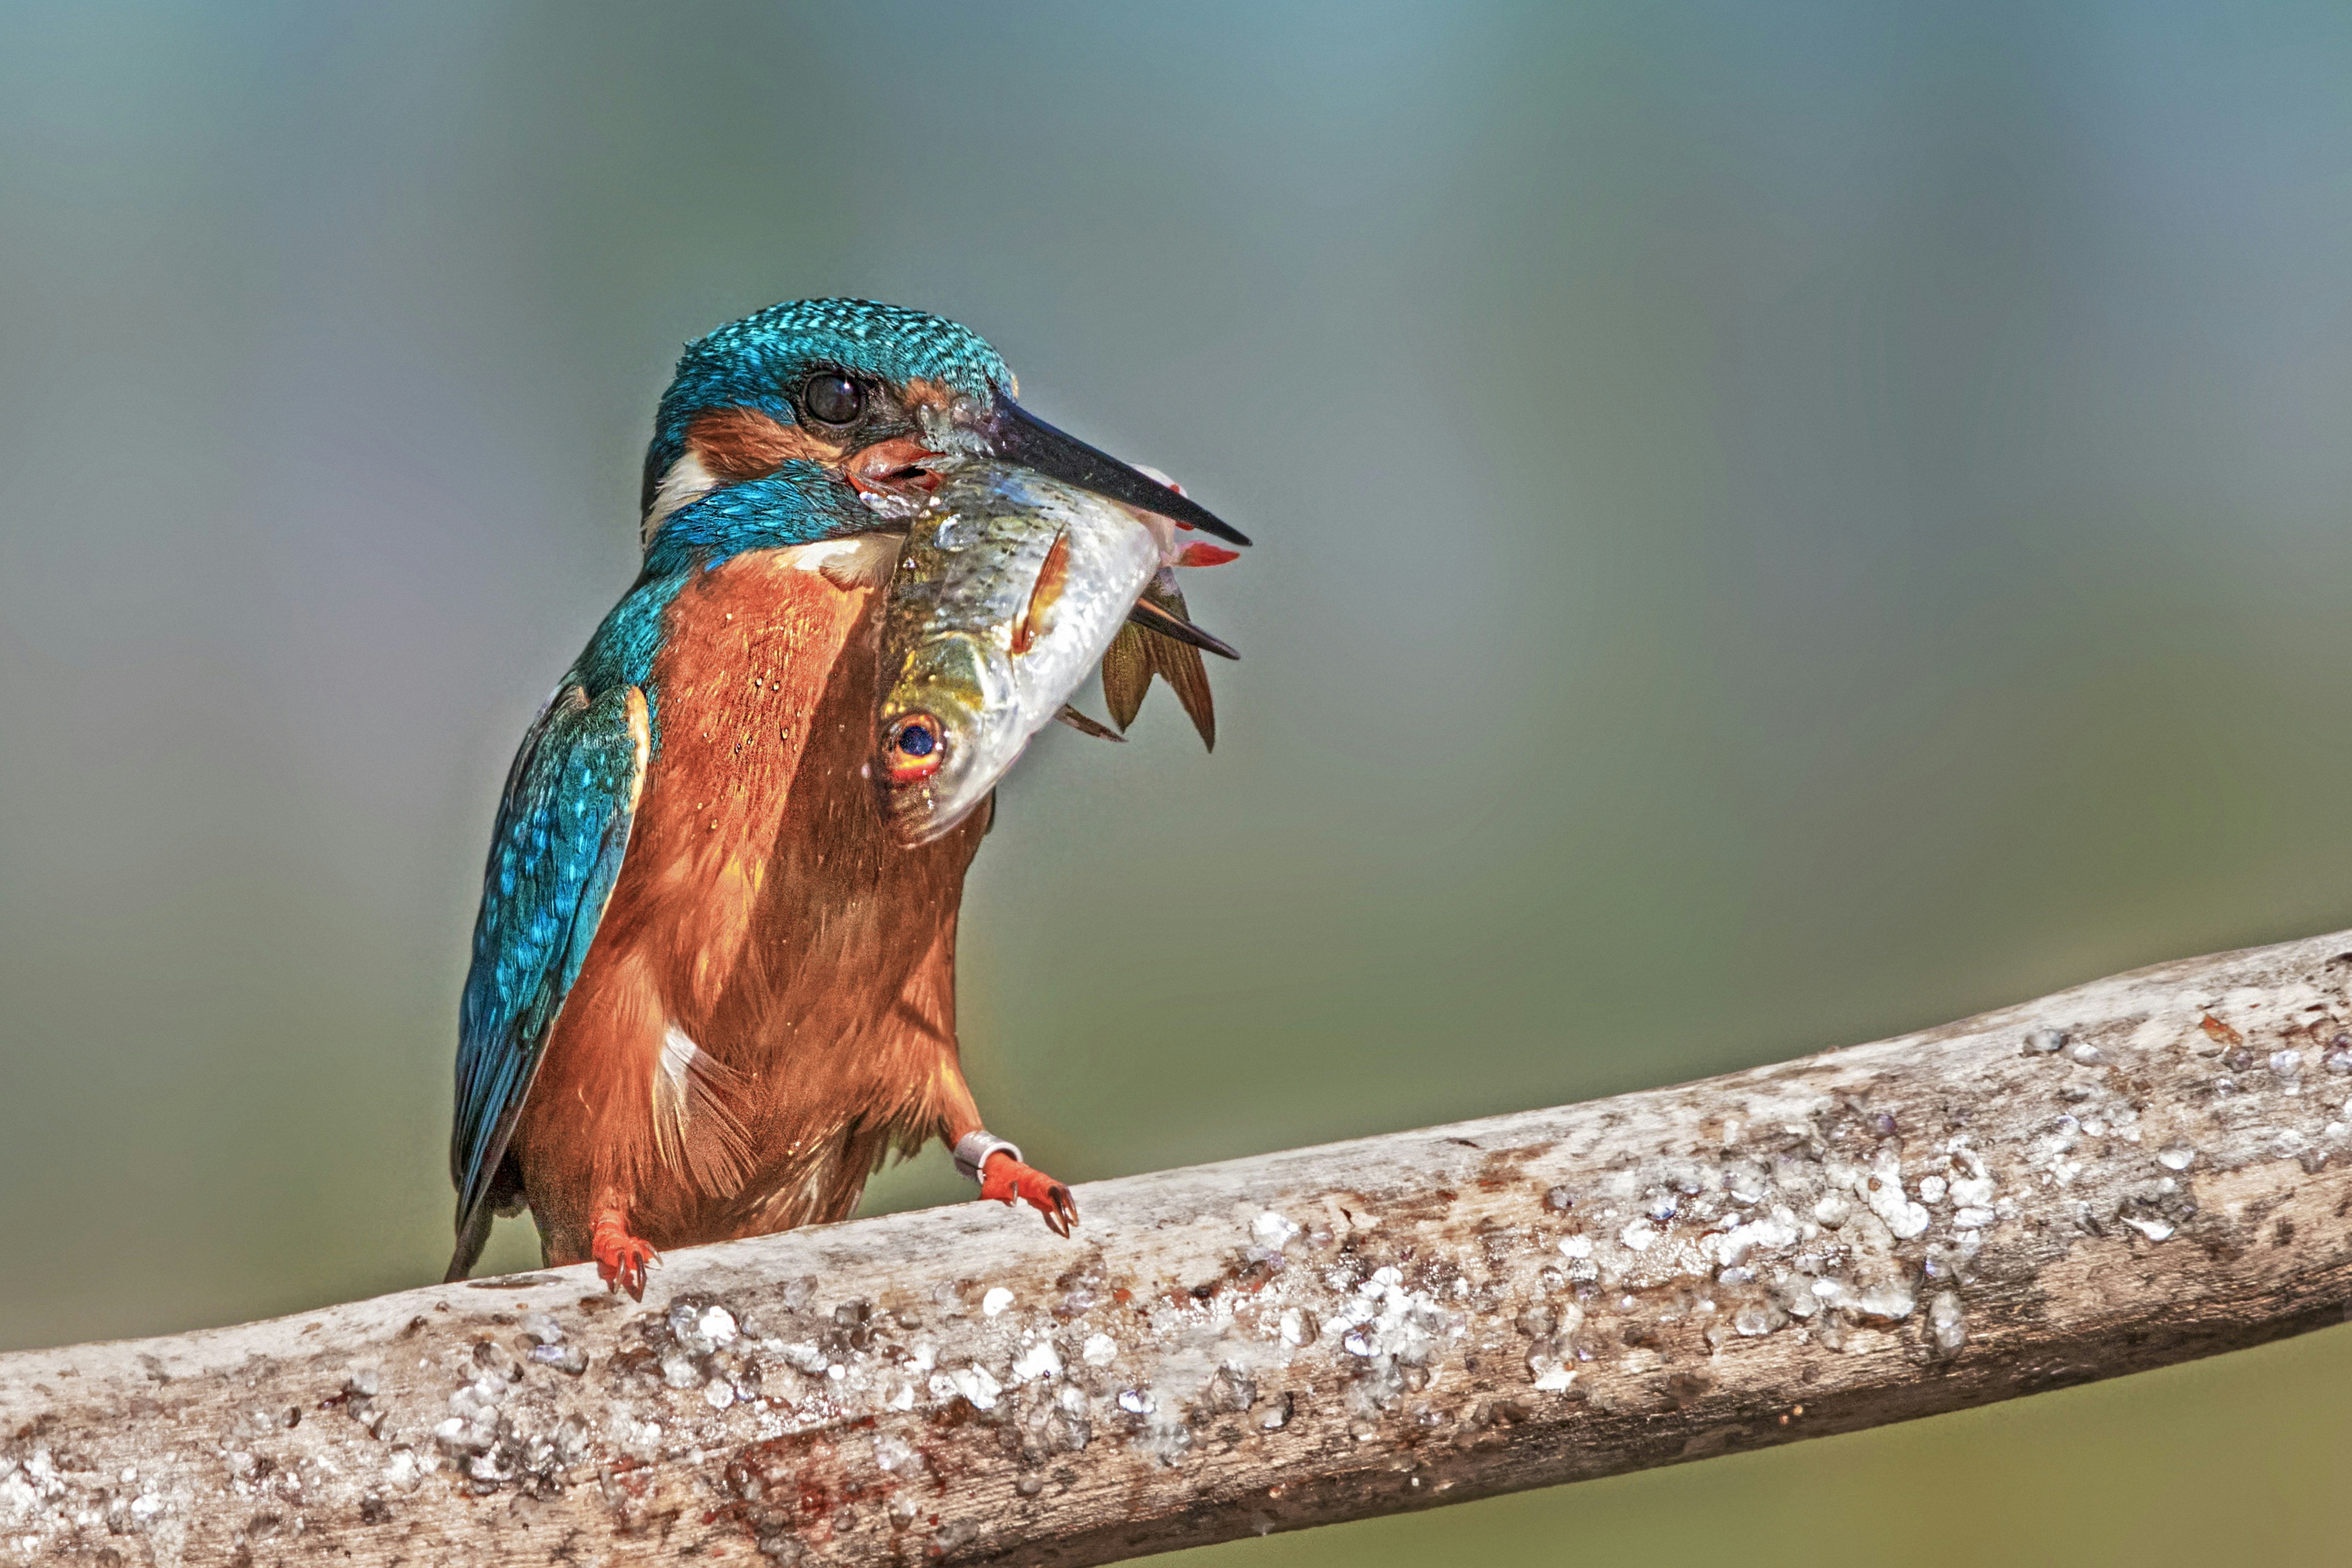 The Kingfisher's big meal